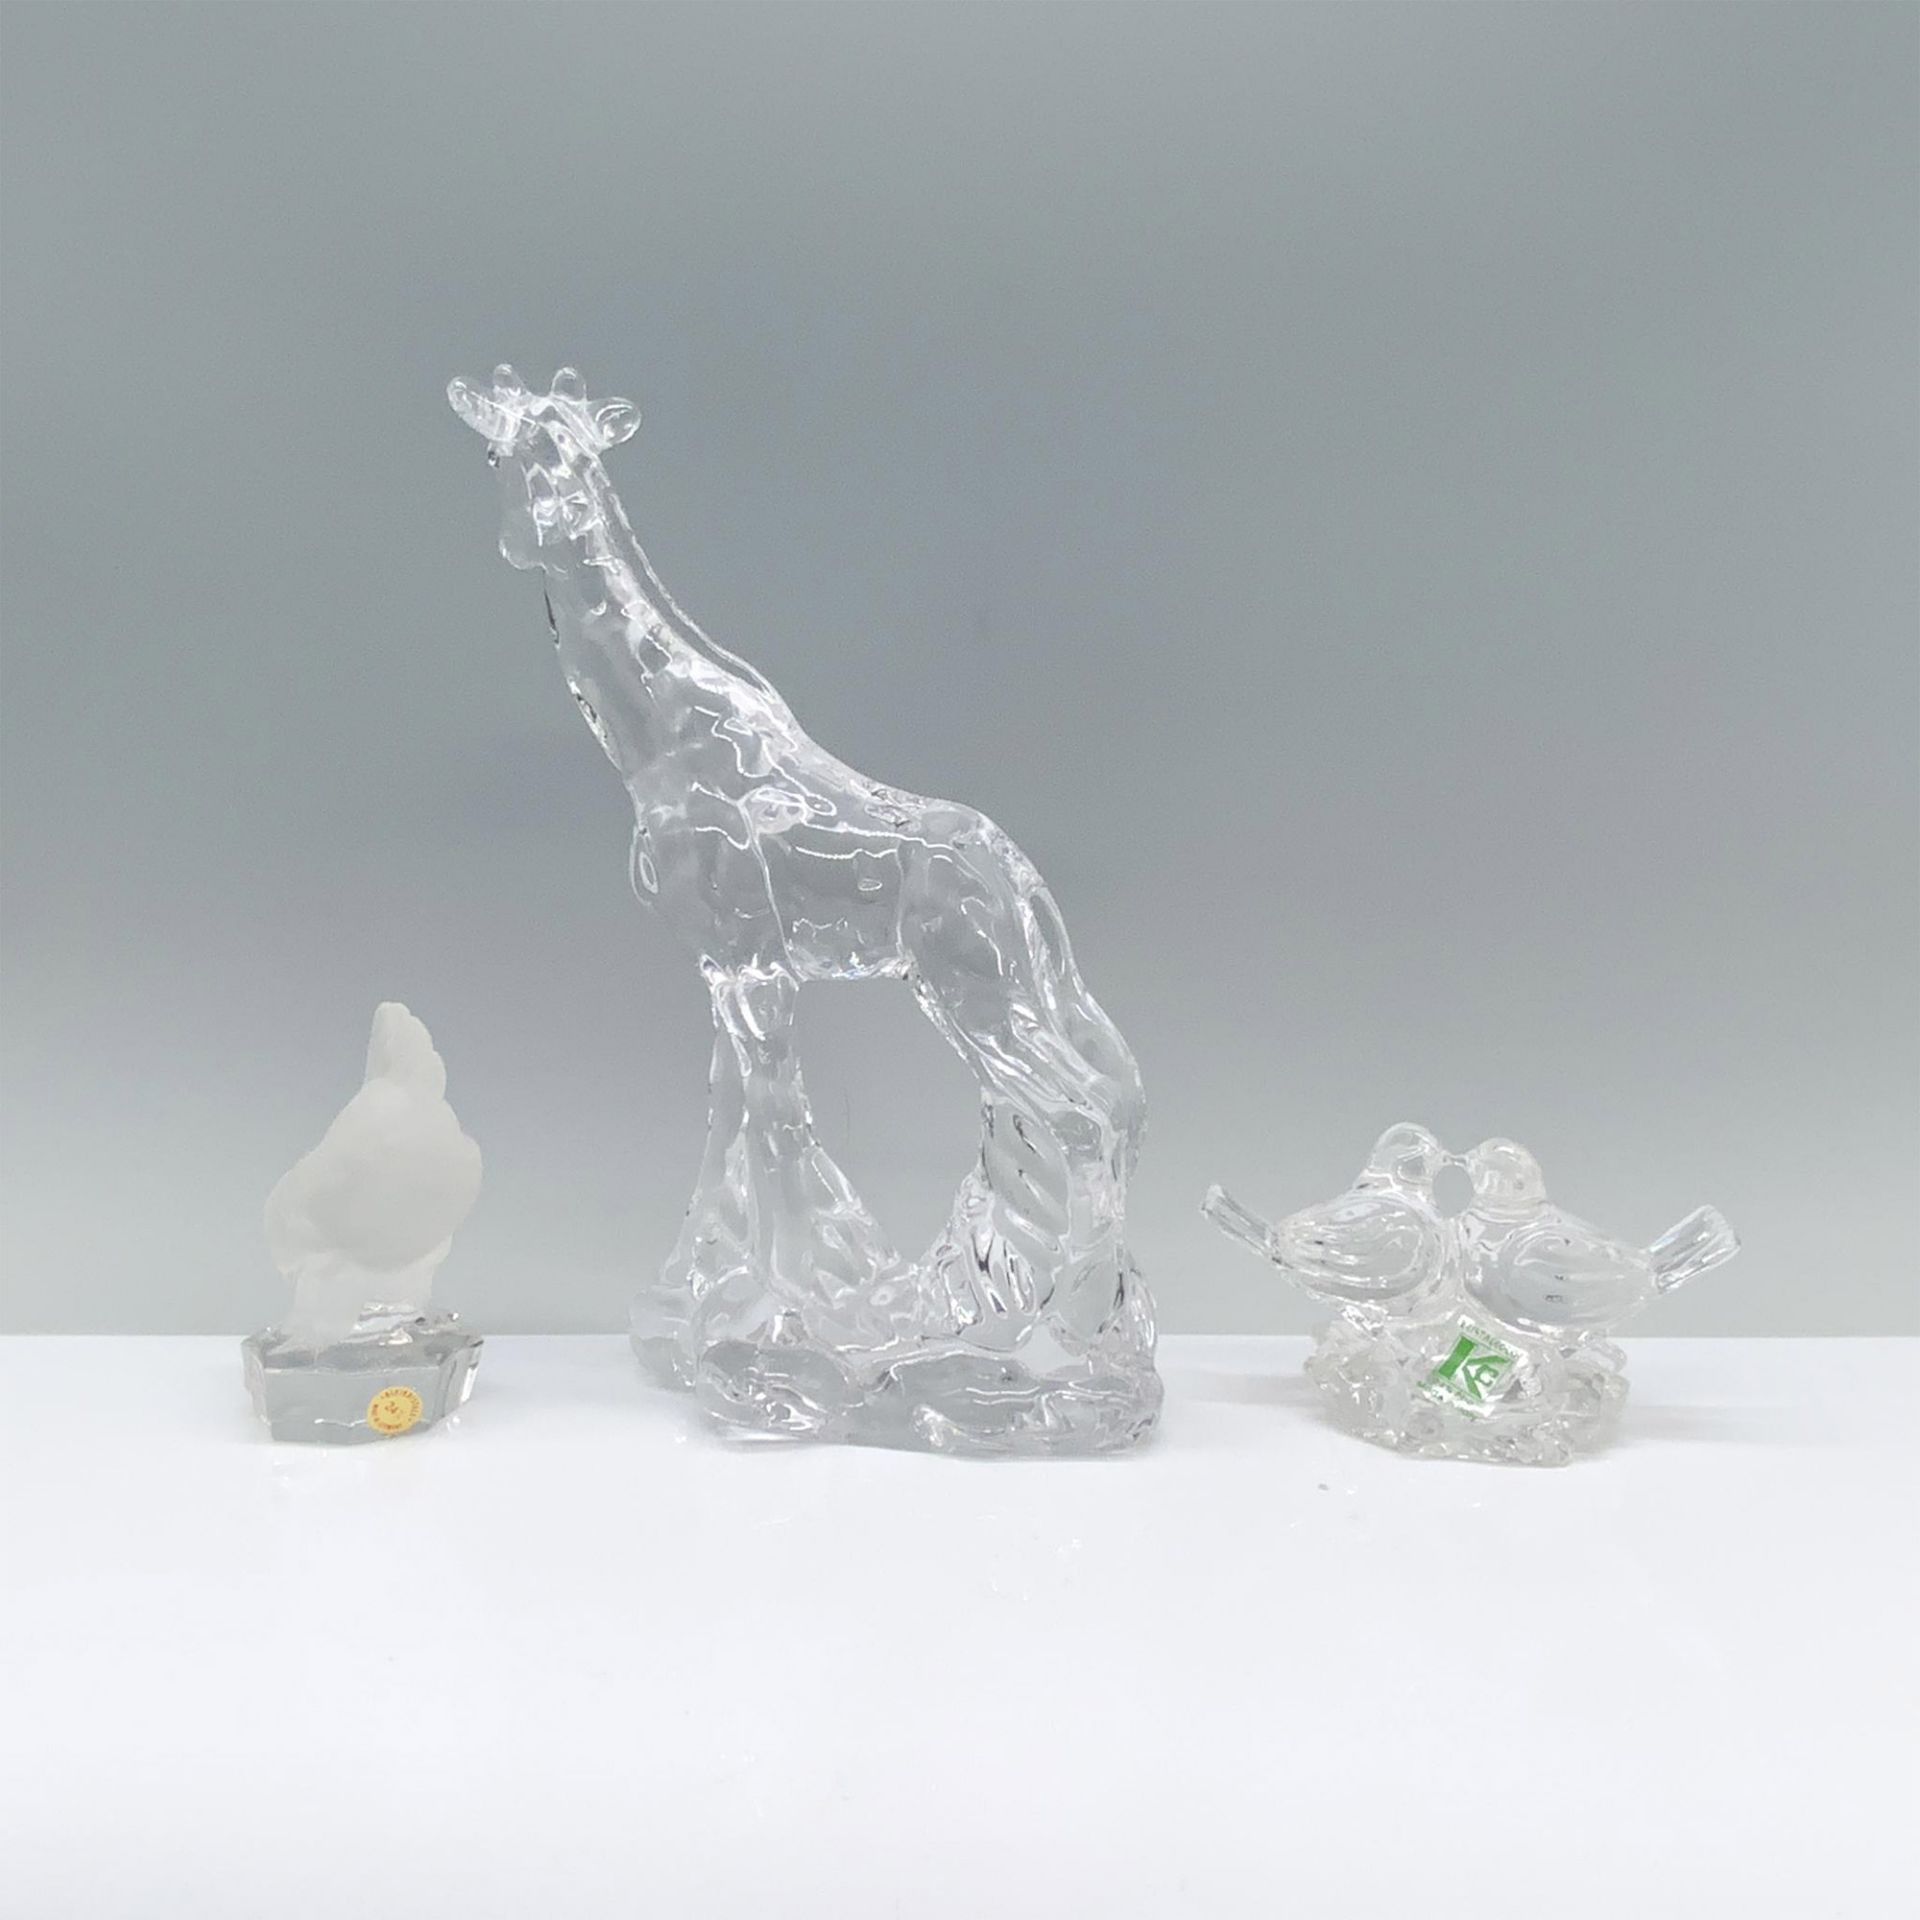 3pc Nachtmann and Kristilcolor Crystal Animal Figurines - Image 2 of 3